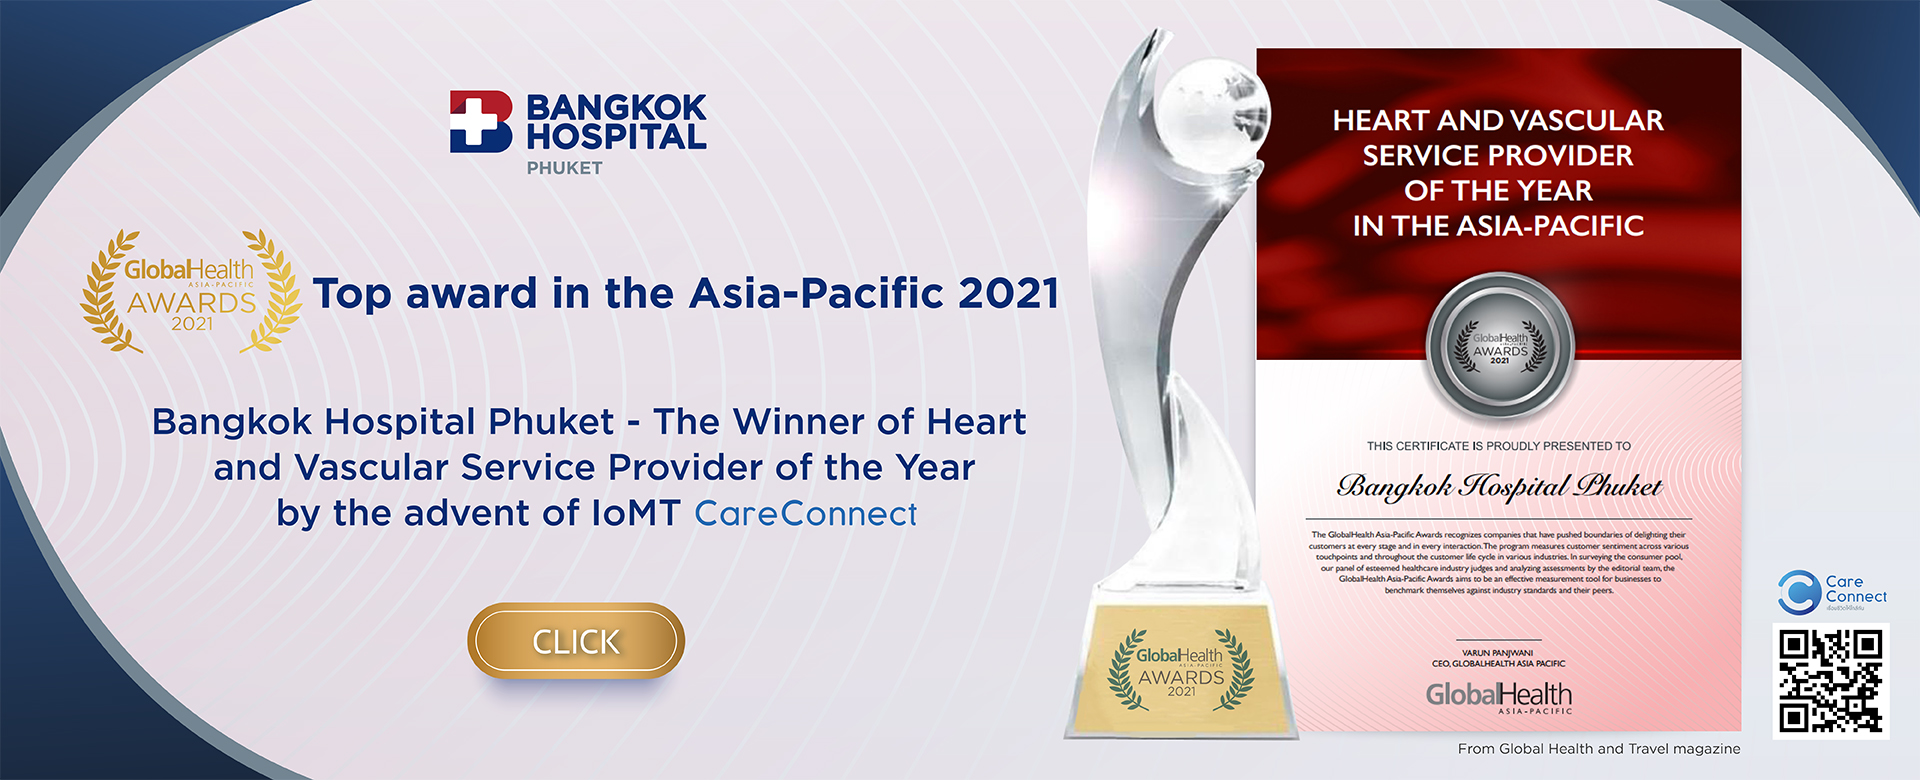 Bangkok Hospital Phuket – The Winner of Heart and Vascular Service Provider of The Year in The Asia-Pacific 2021